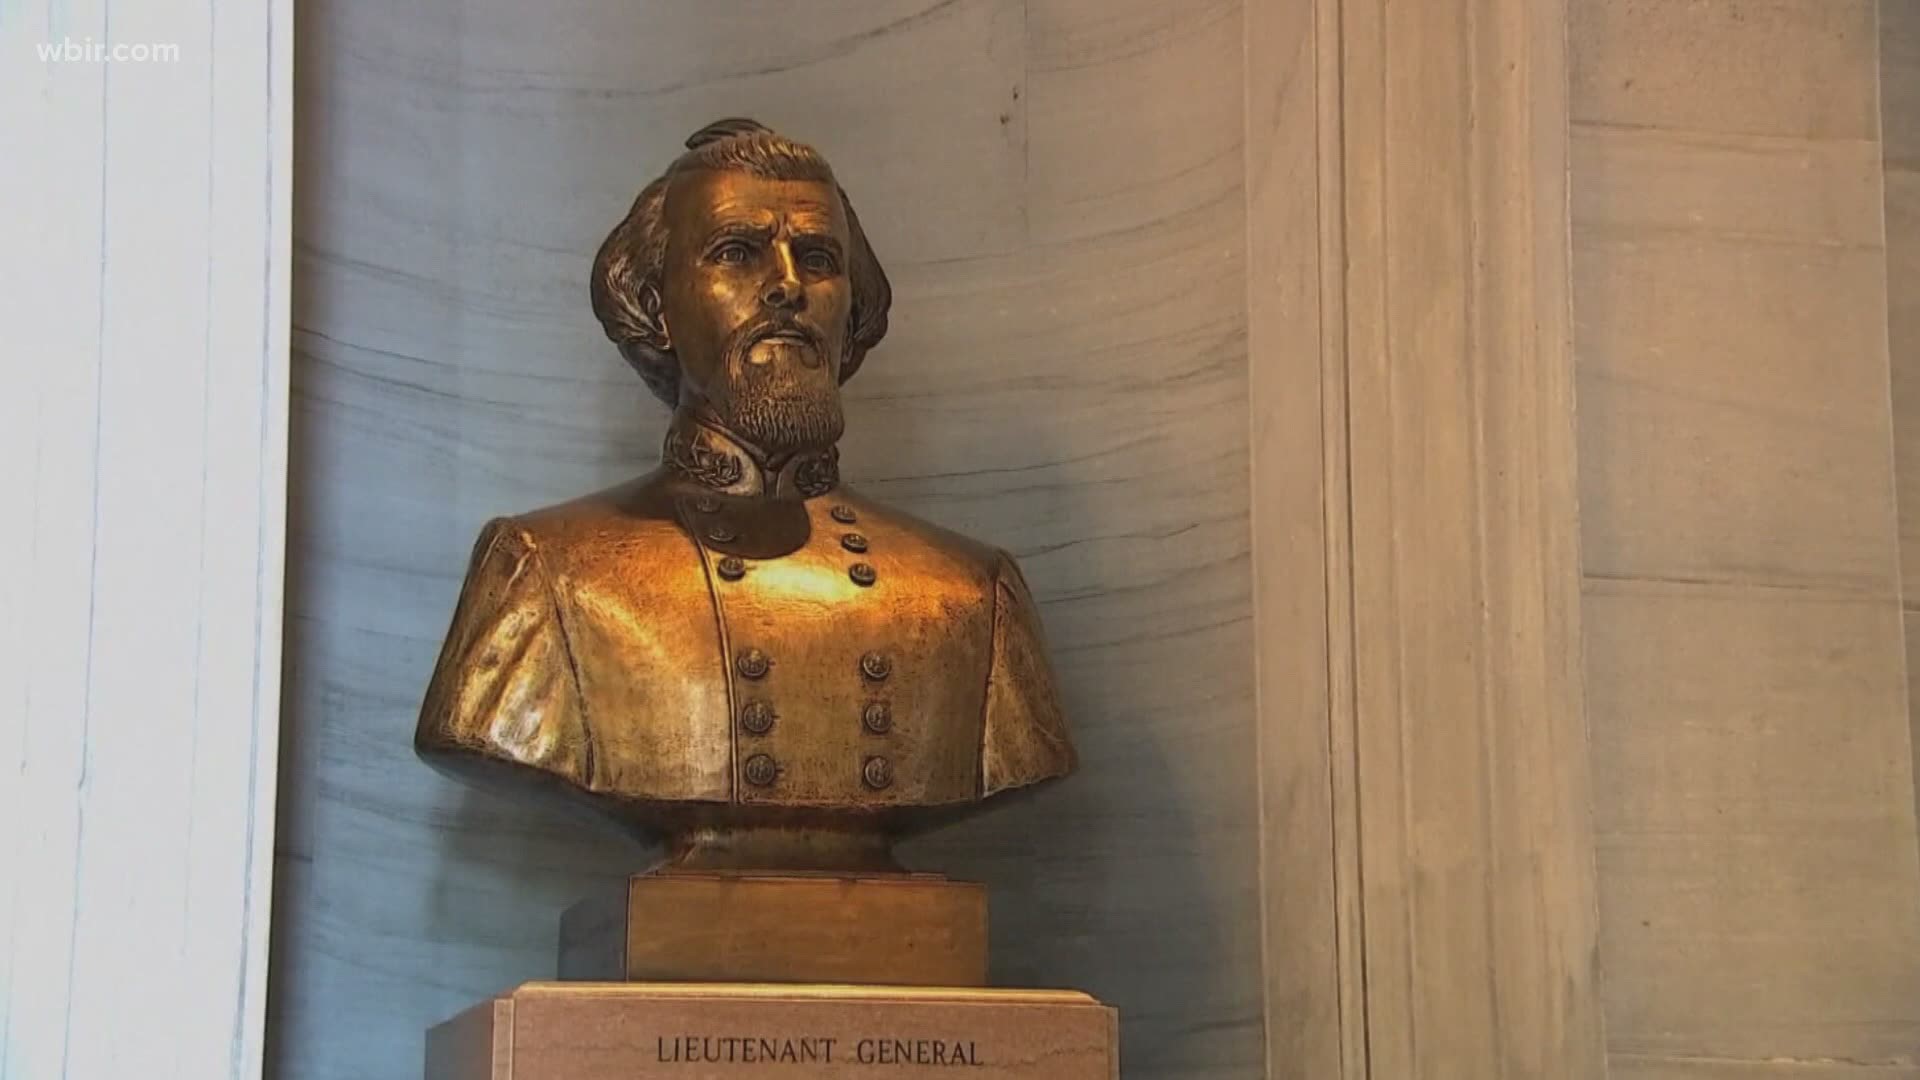 Mayor Glenn Jacobs said the removal of the Nathan Bedford Forrest from the state capitol was the right move for the entire community.